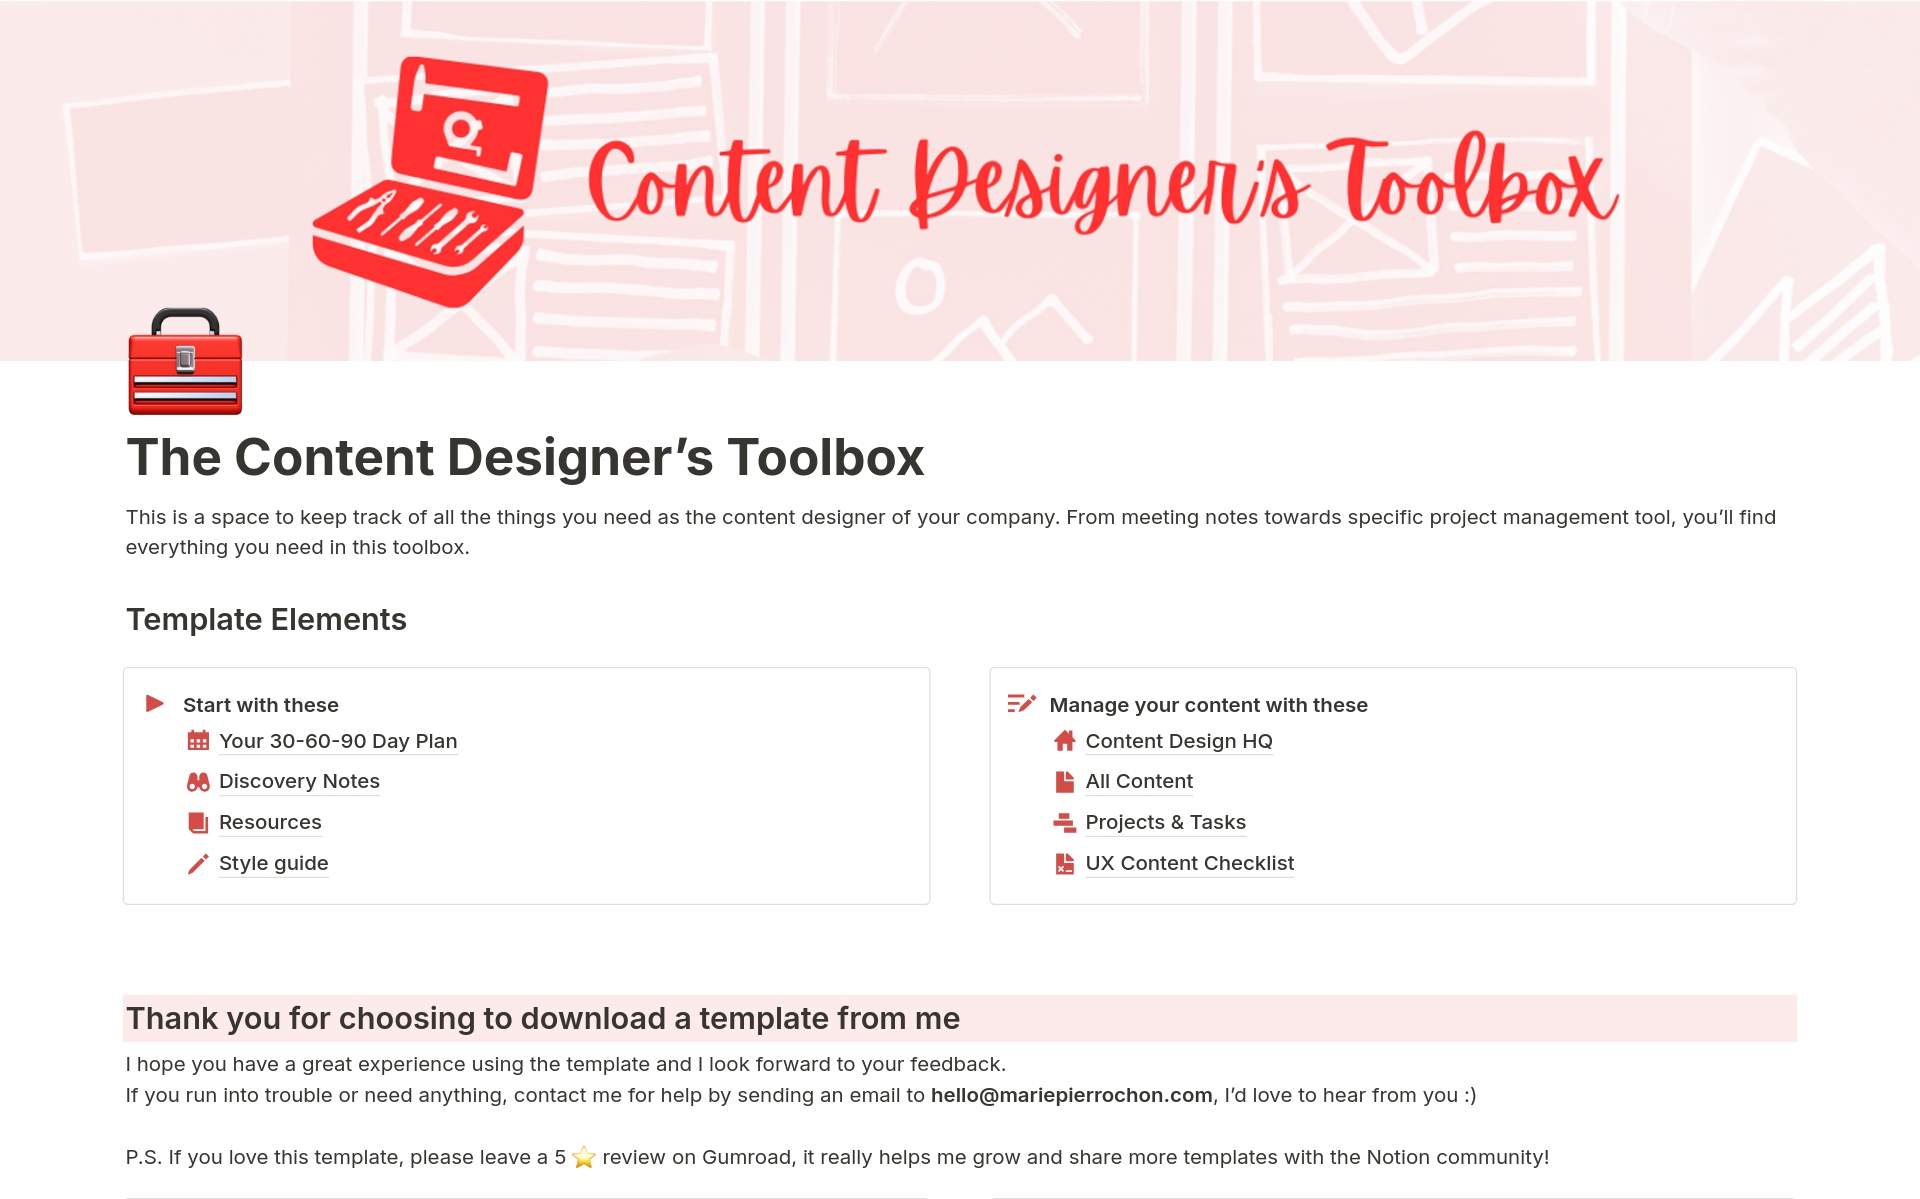 This is a Notion template for people who want to track their UX copywriting content, projects and resources. Includes space for a style guide, discovery notes and UX-related resources. Integrated with a UX editing checklist.